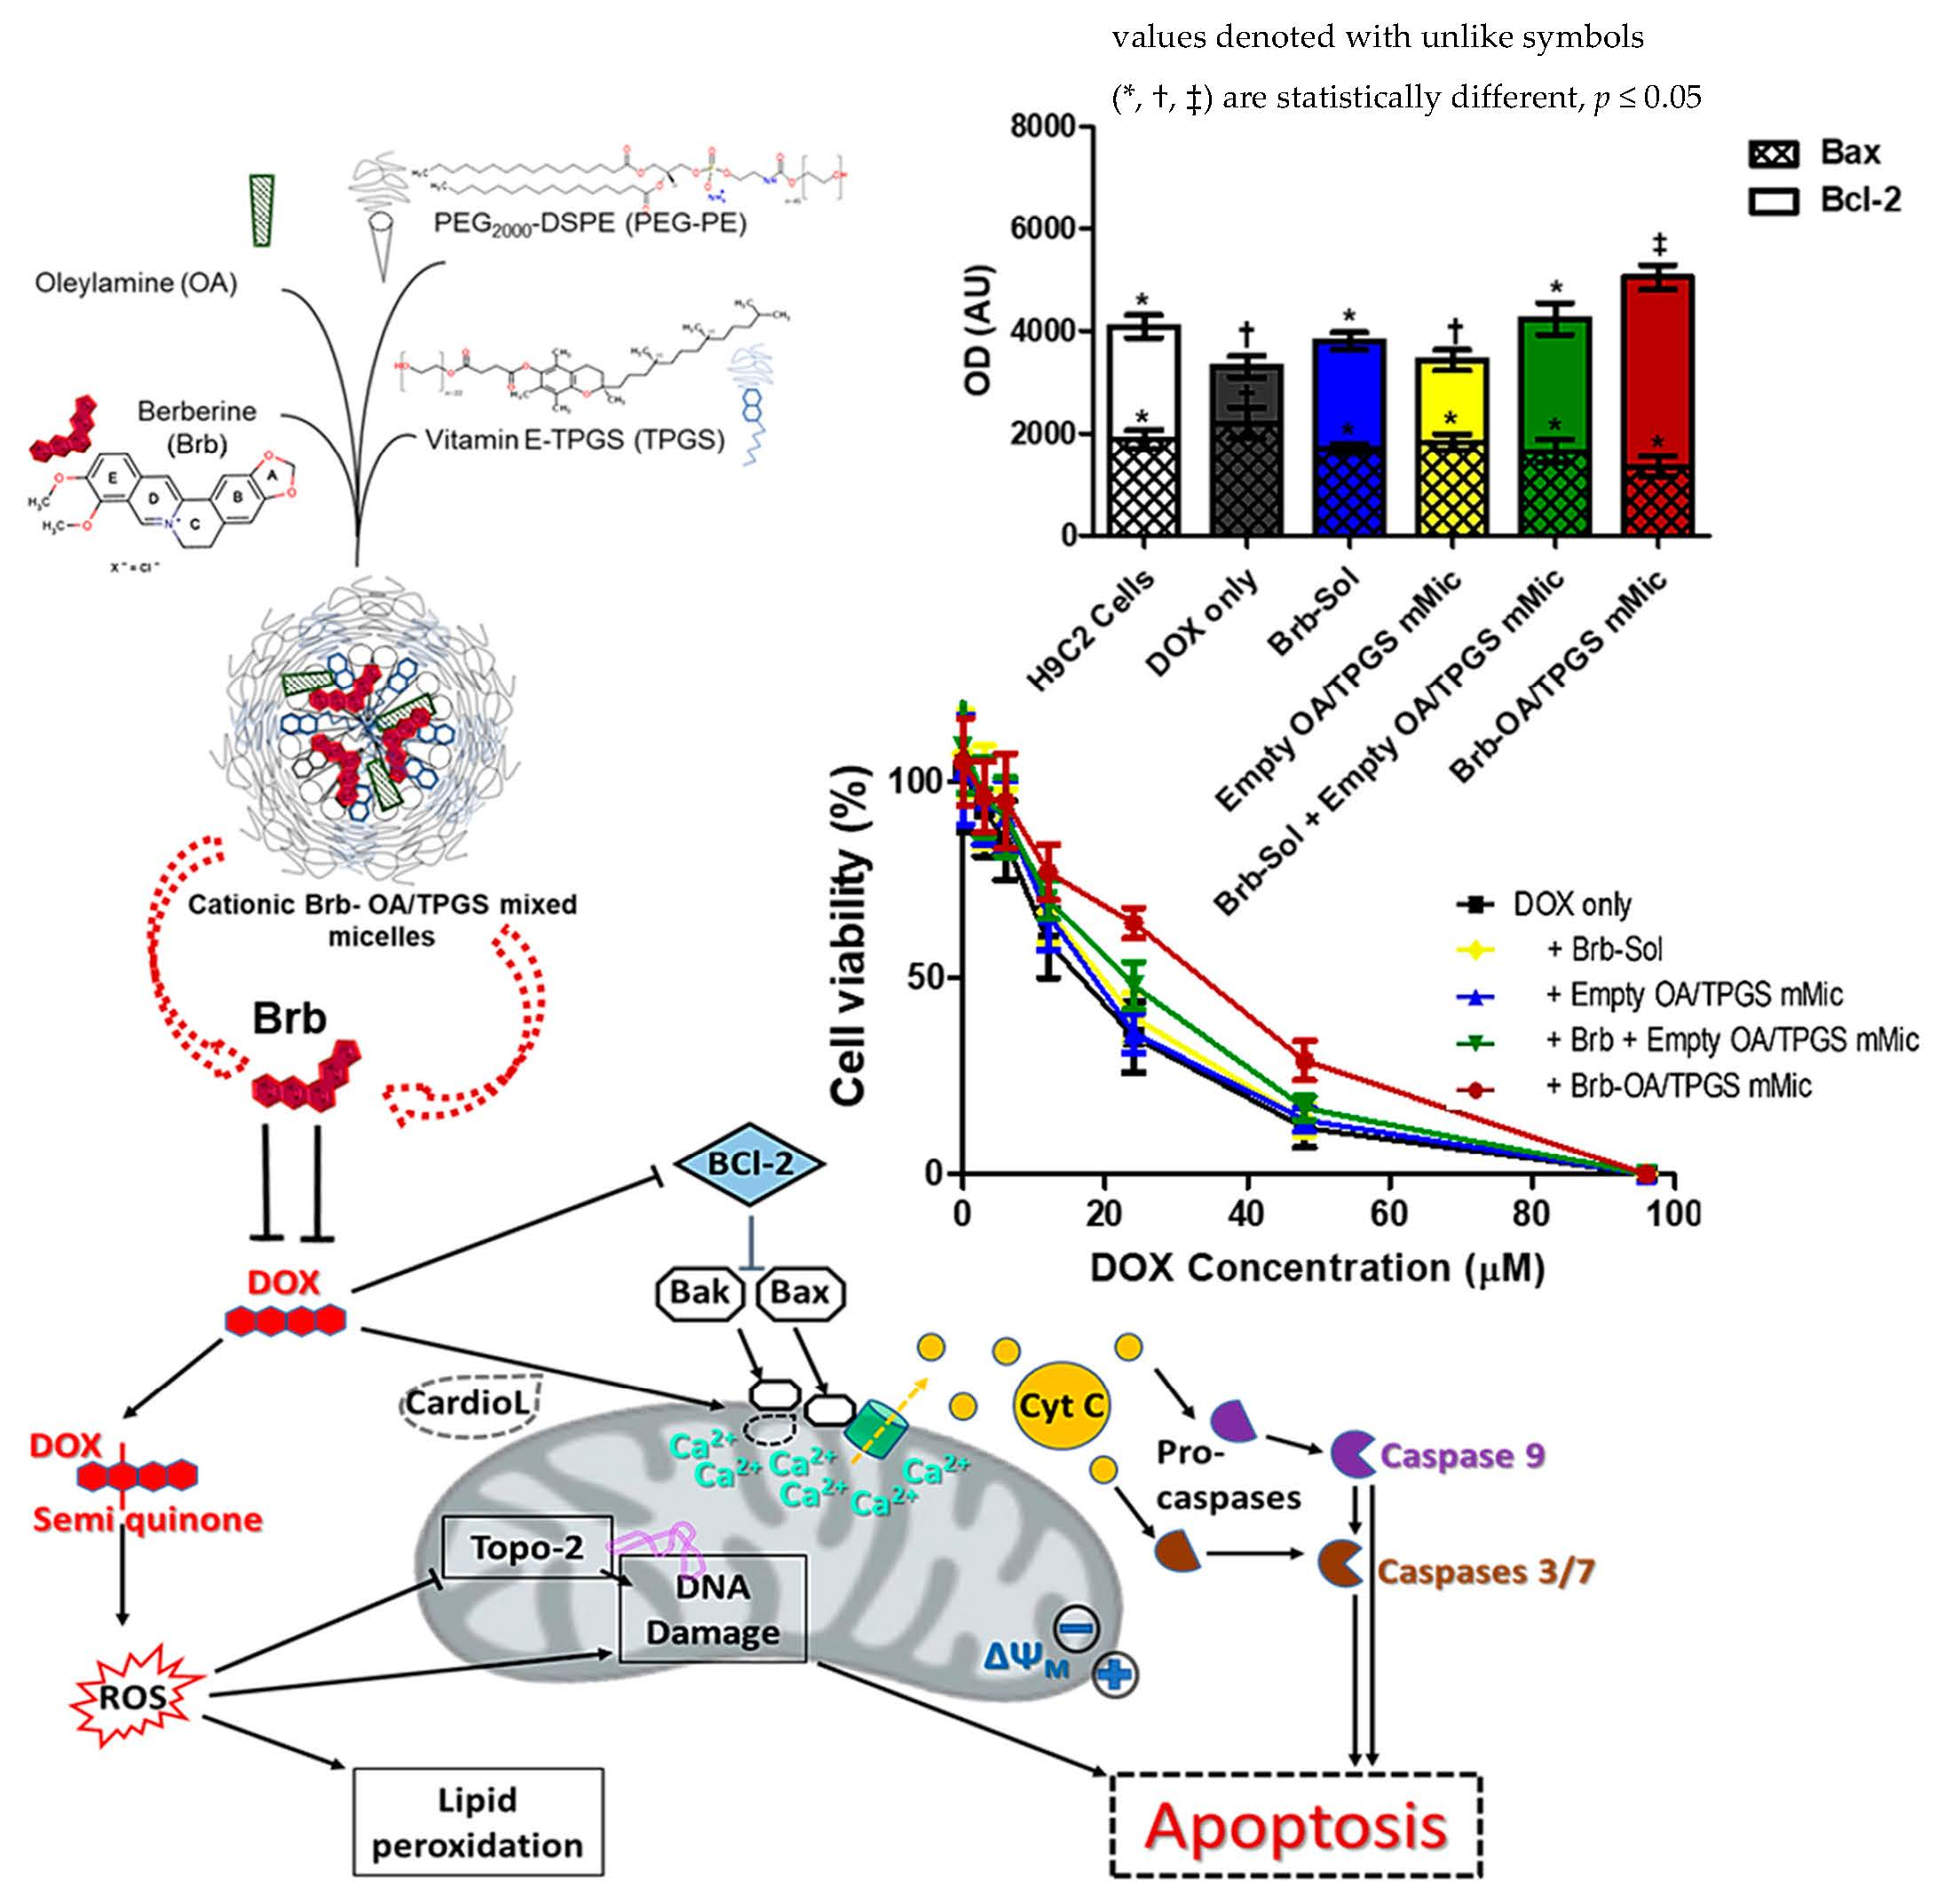 Cationic Vitamin E-TPGS Mixed Micelles of Berberine to Neutralize Doxorubicin-Induced Cardiotoxicity via Amelioration of Mitochondrial Dysfunction and Impeding Apoptosis